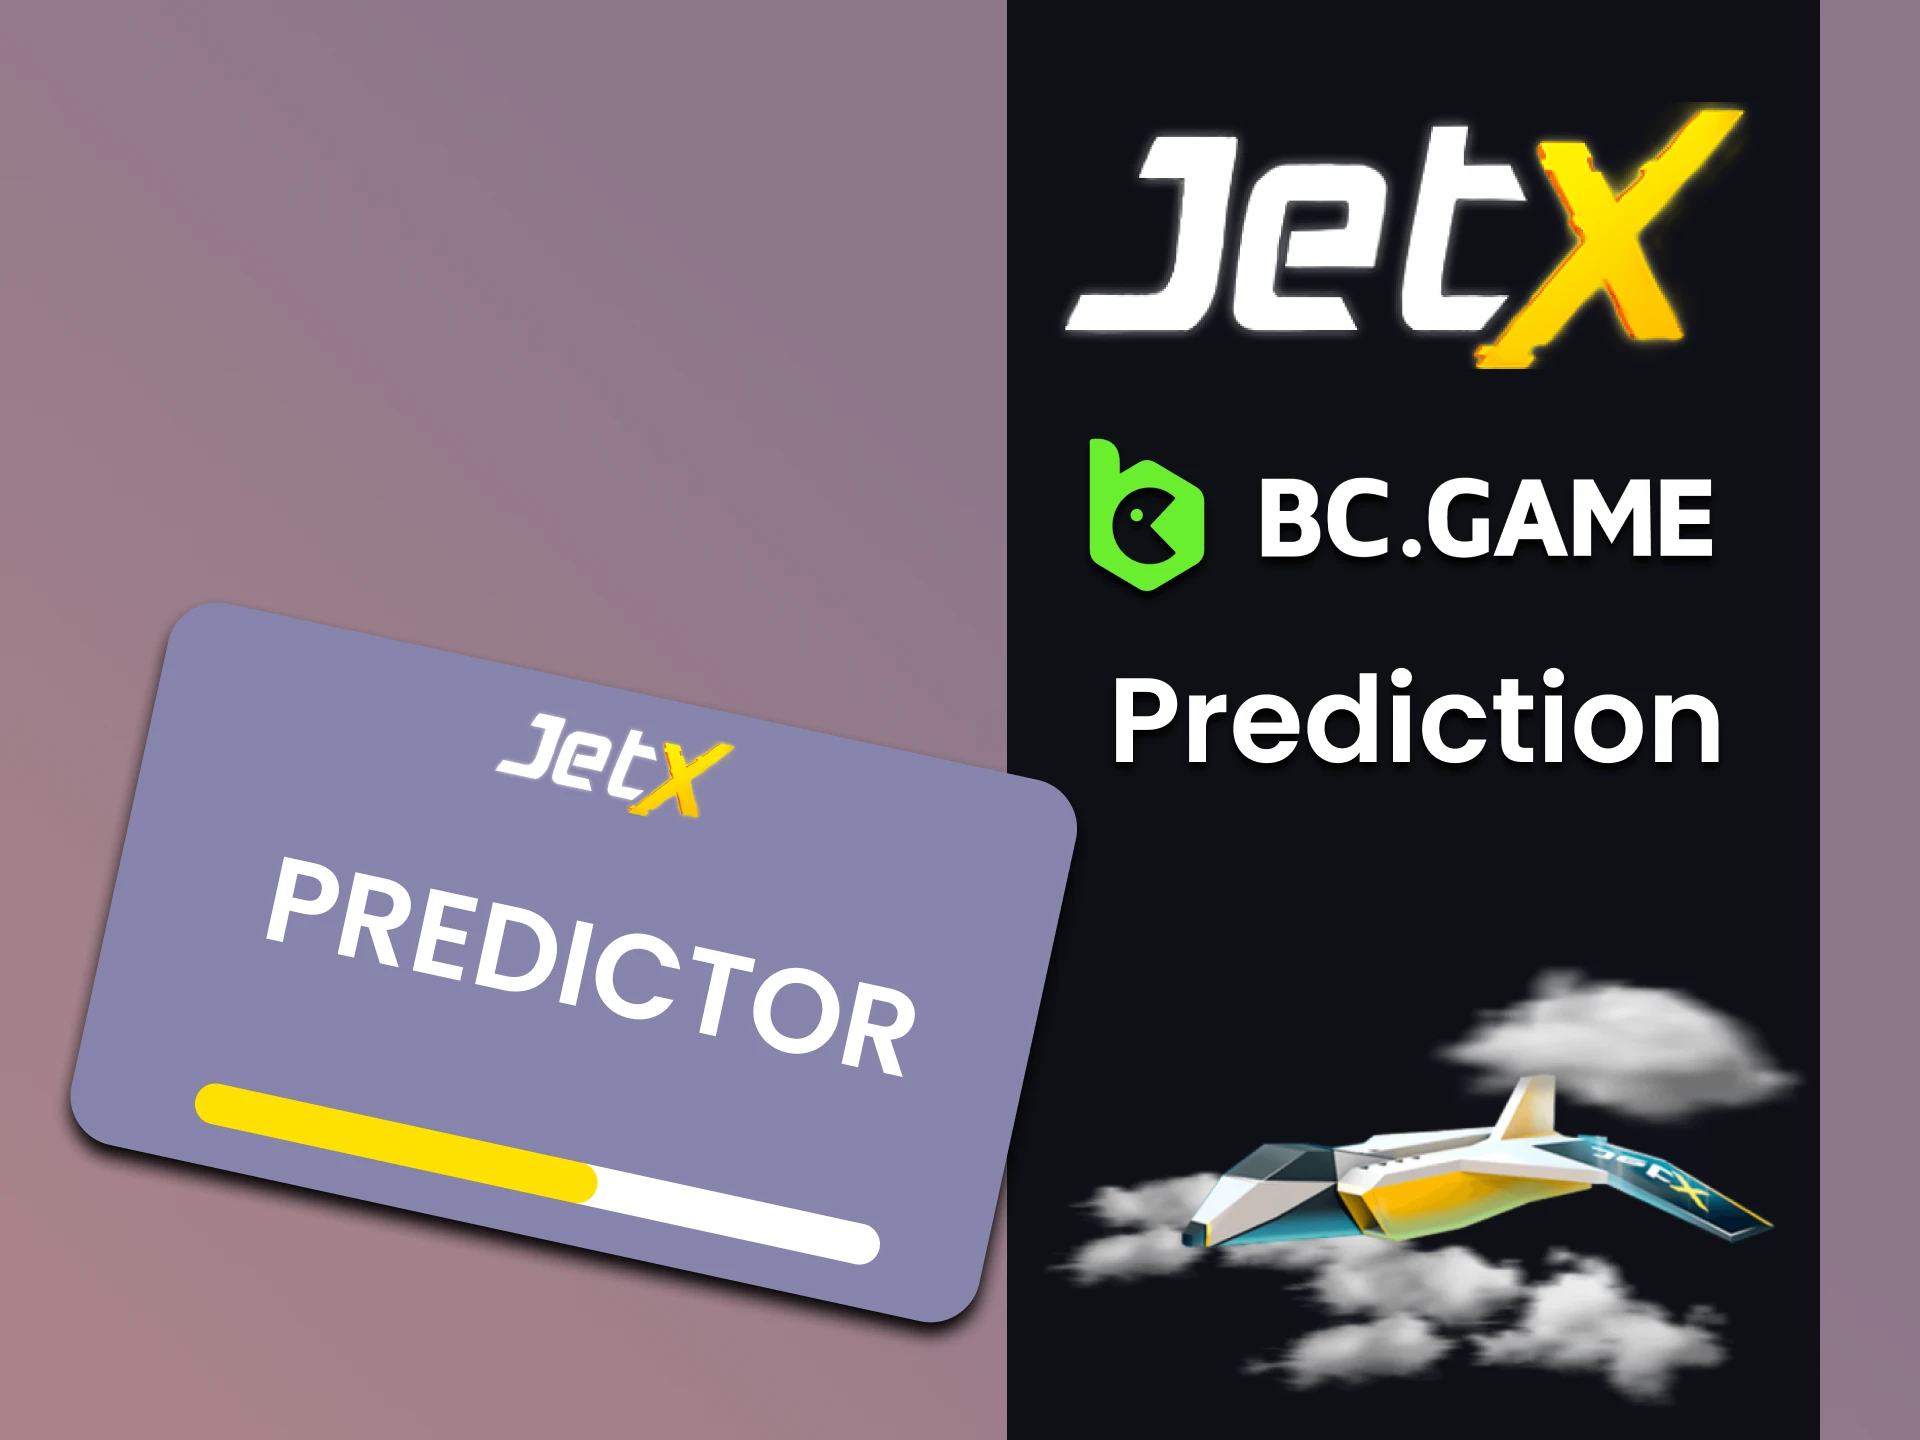 We'll cover third-party software for JetX on BC Game.